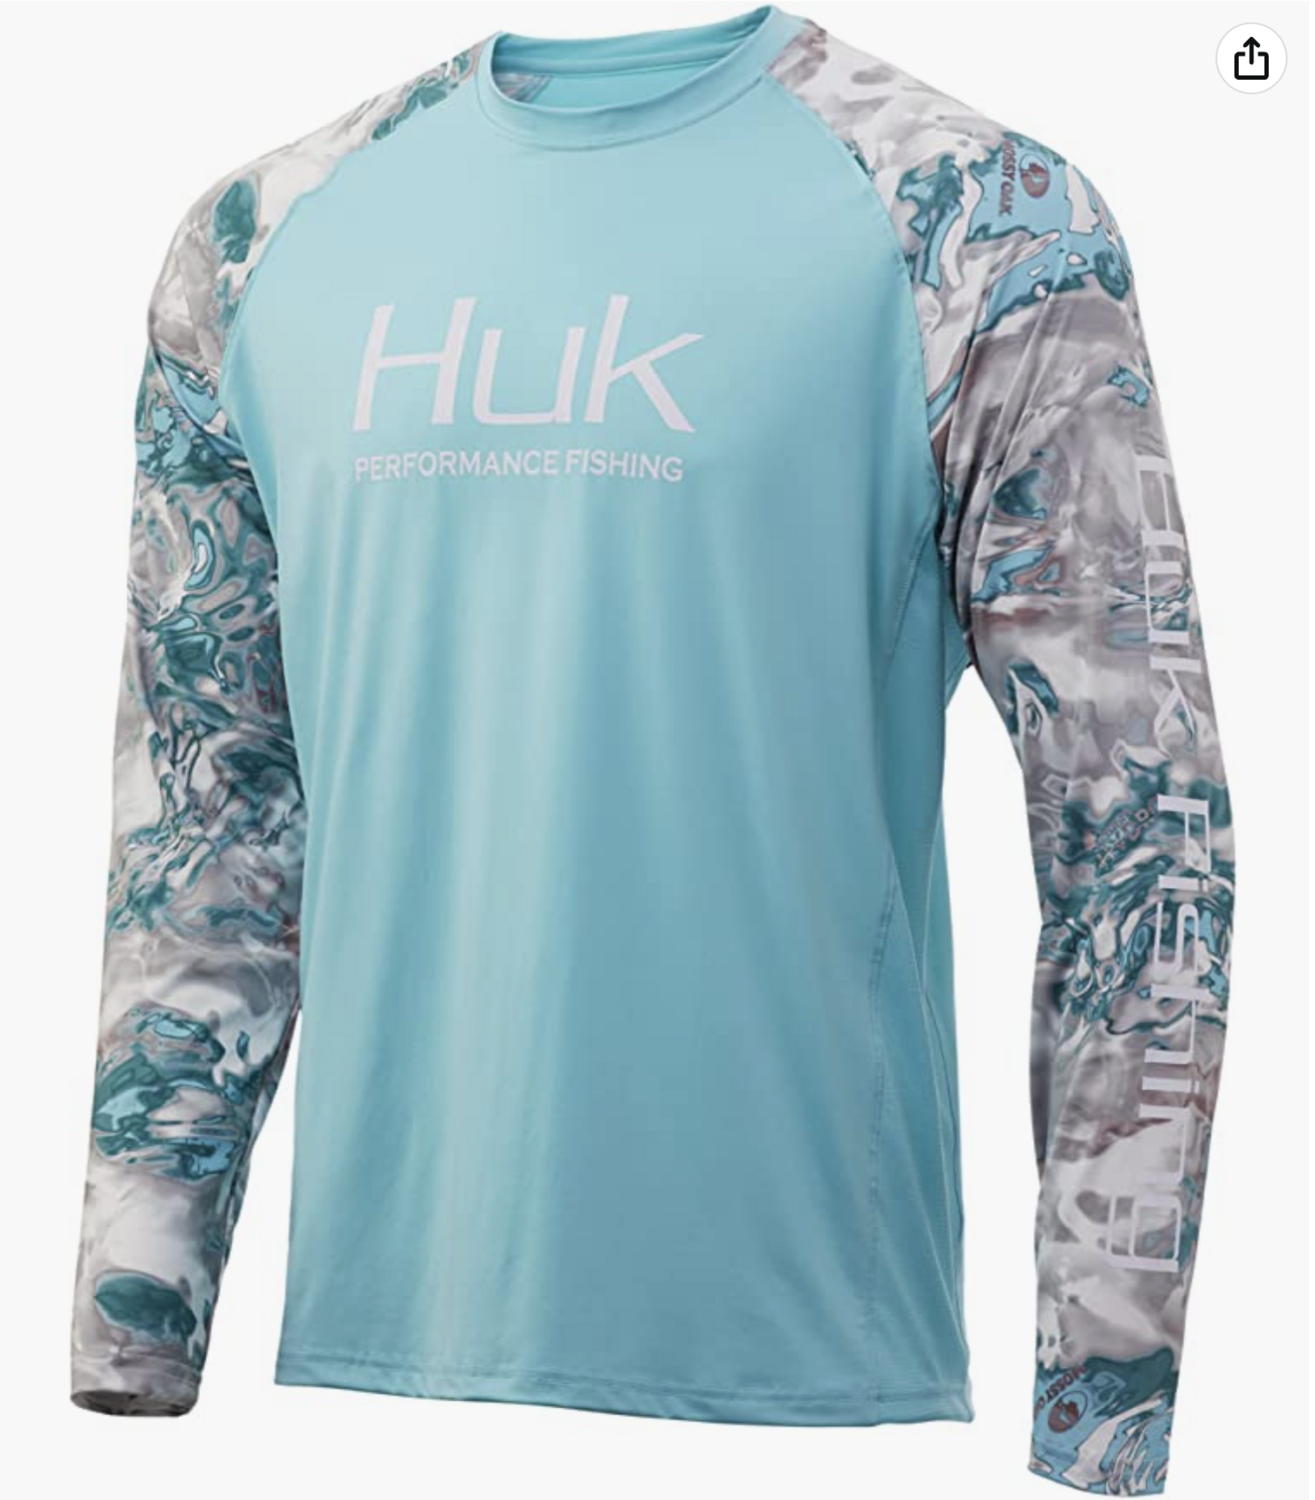 Huk Mossy Oak Double Header Vented - 3XL - MO Hydro Shallows